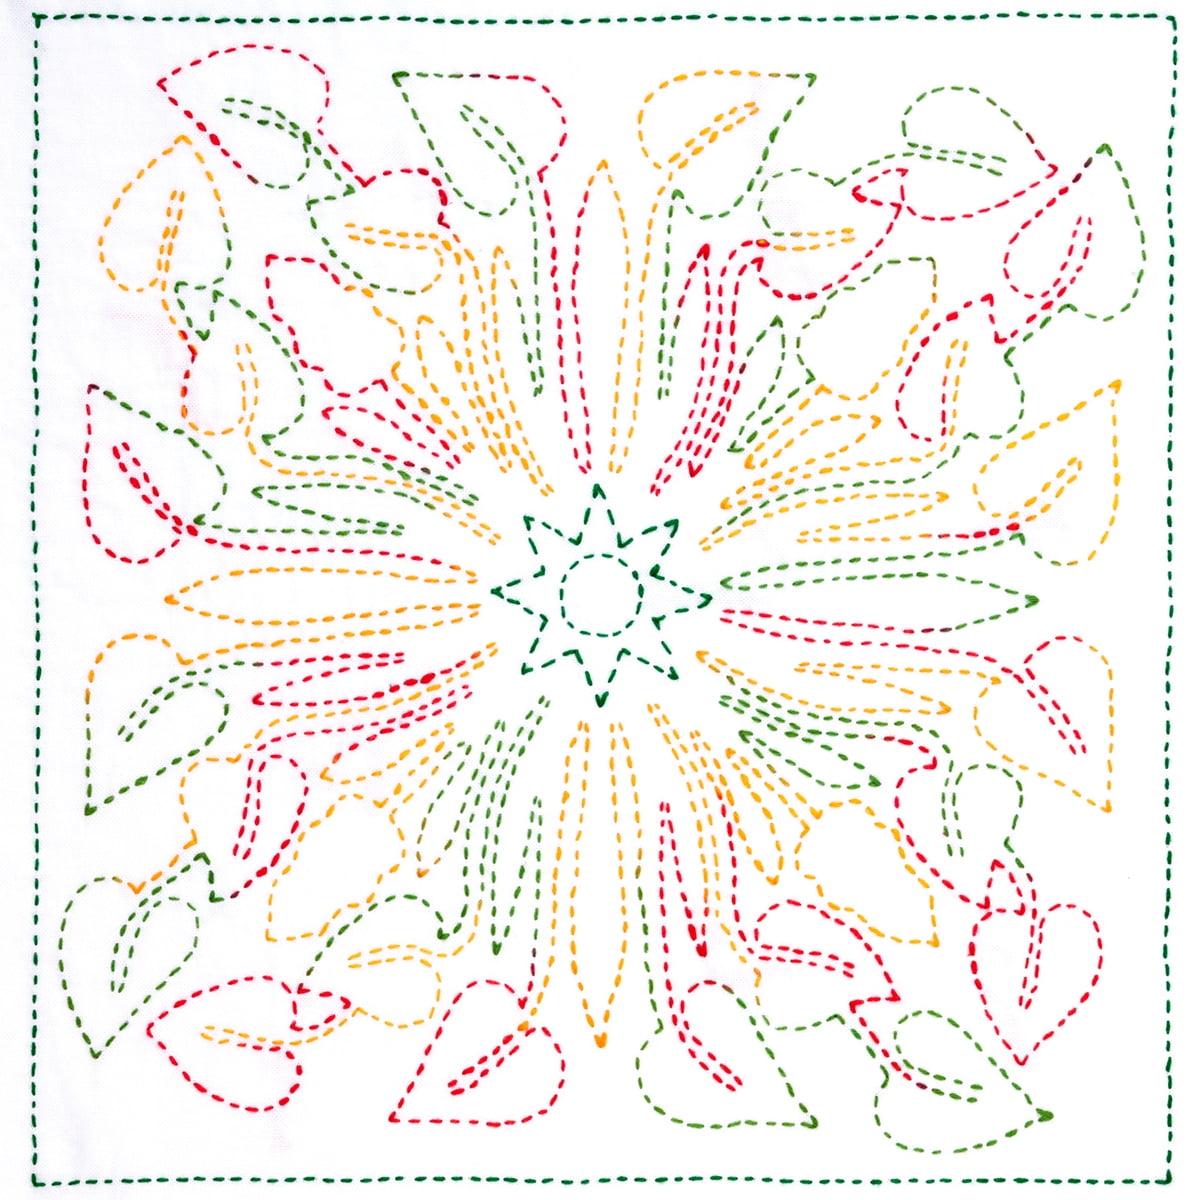 Leisure Arts Embroidery Kit 6 Blessed Floral- embroidery kit for beginners  - embroidery kit for adults - cross stitch kits - cross stitch kits for  beginners - embroidery patterns 